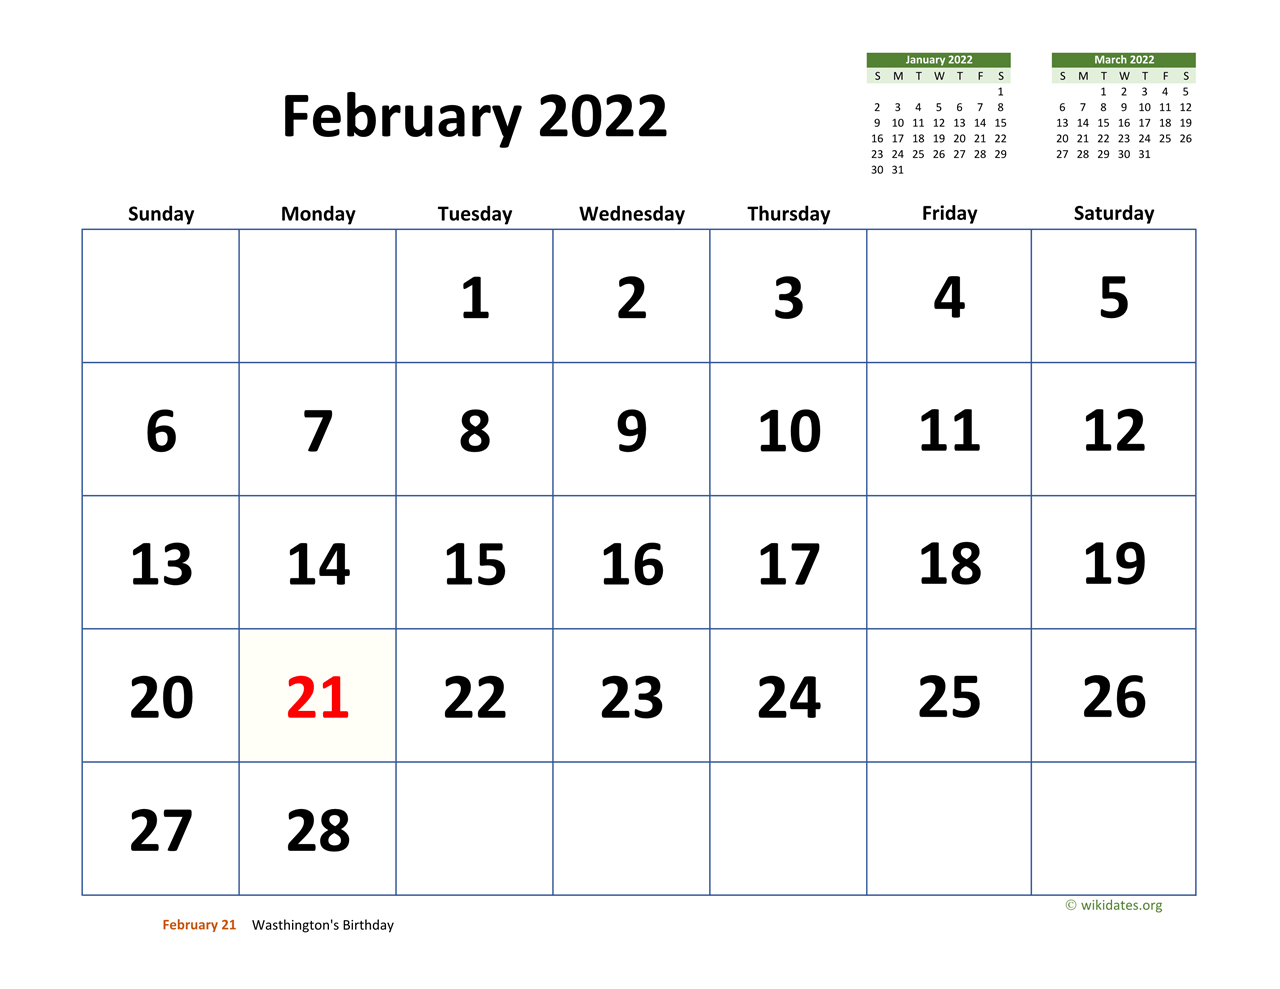 February 2022 Calendar with Extralarge Dates